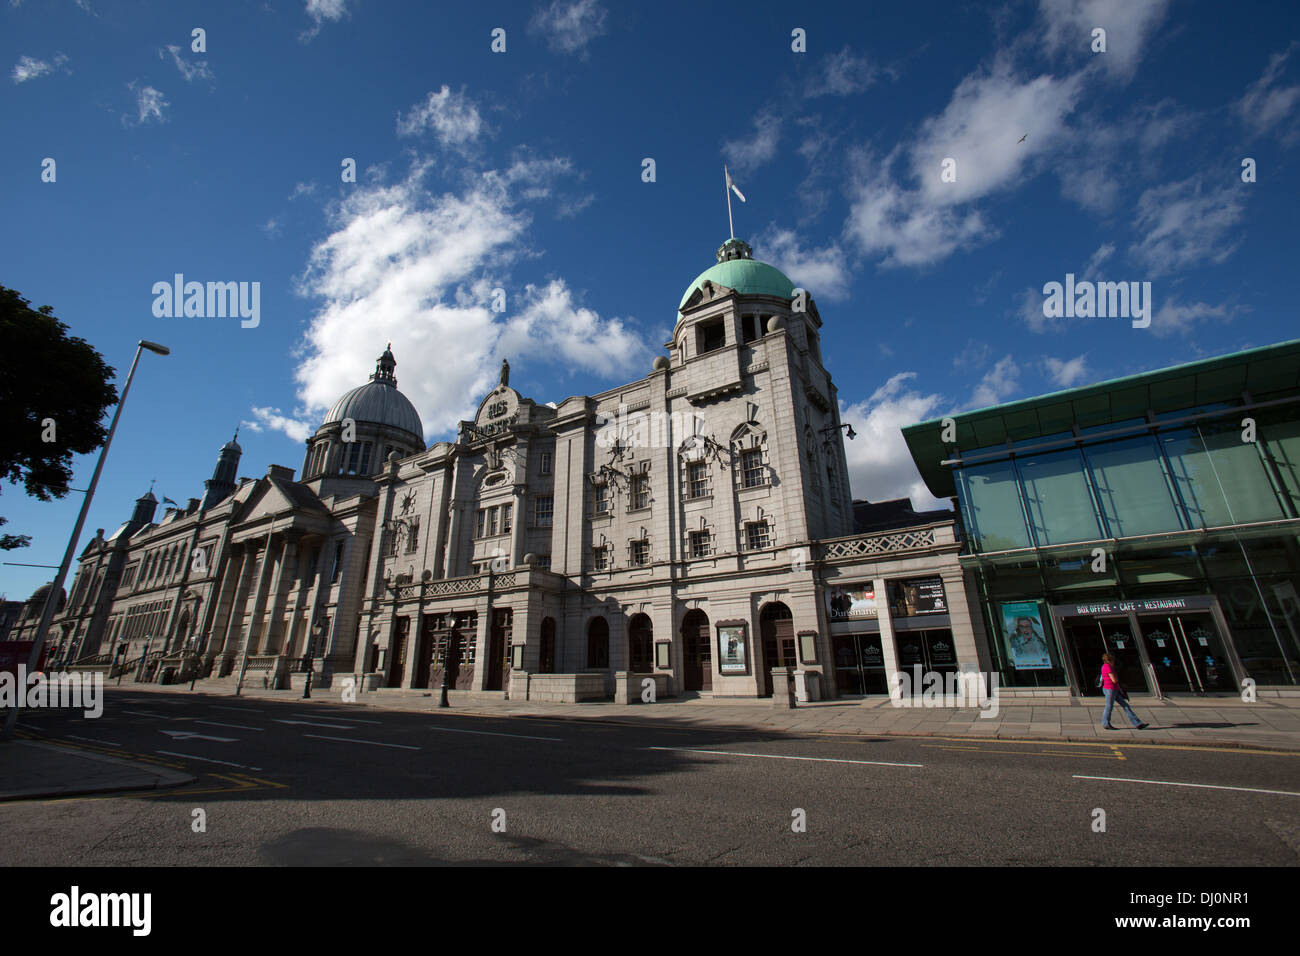 City of Aberdeen, Scotland. Picturesque view of Rosemount Viaduct, with His Majesty’s Theatre in the foreground. Stock Photo